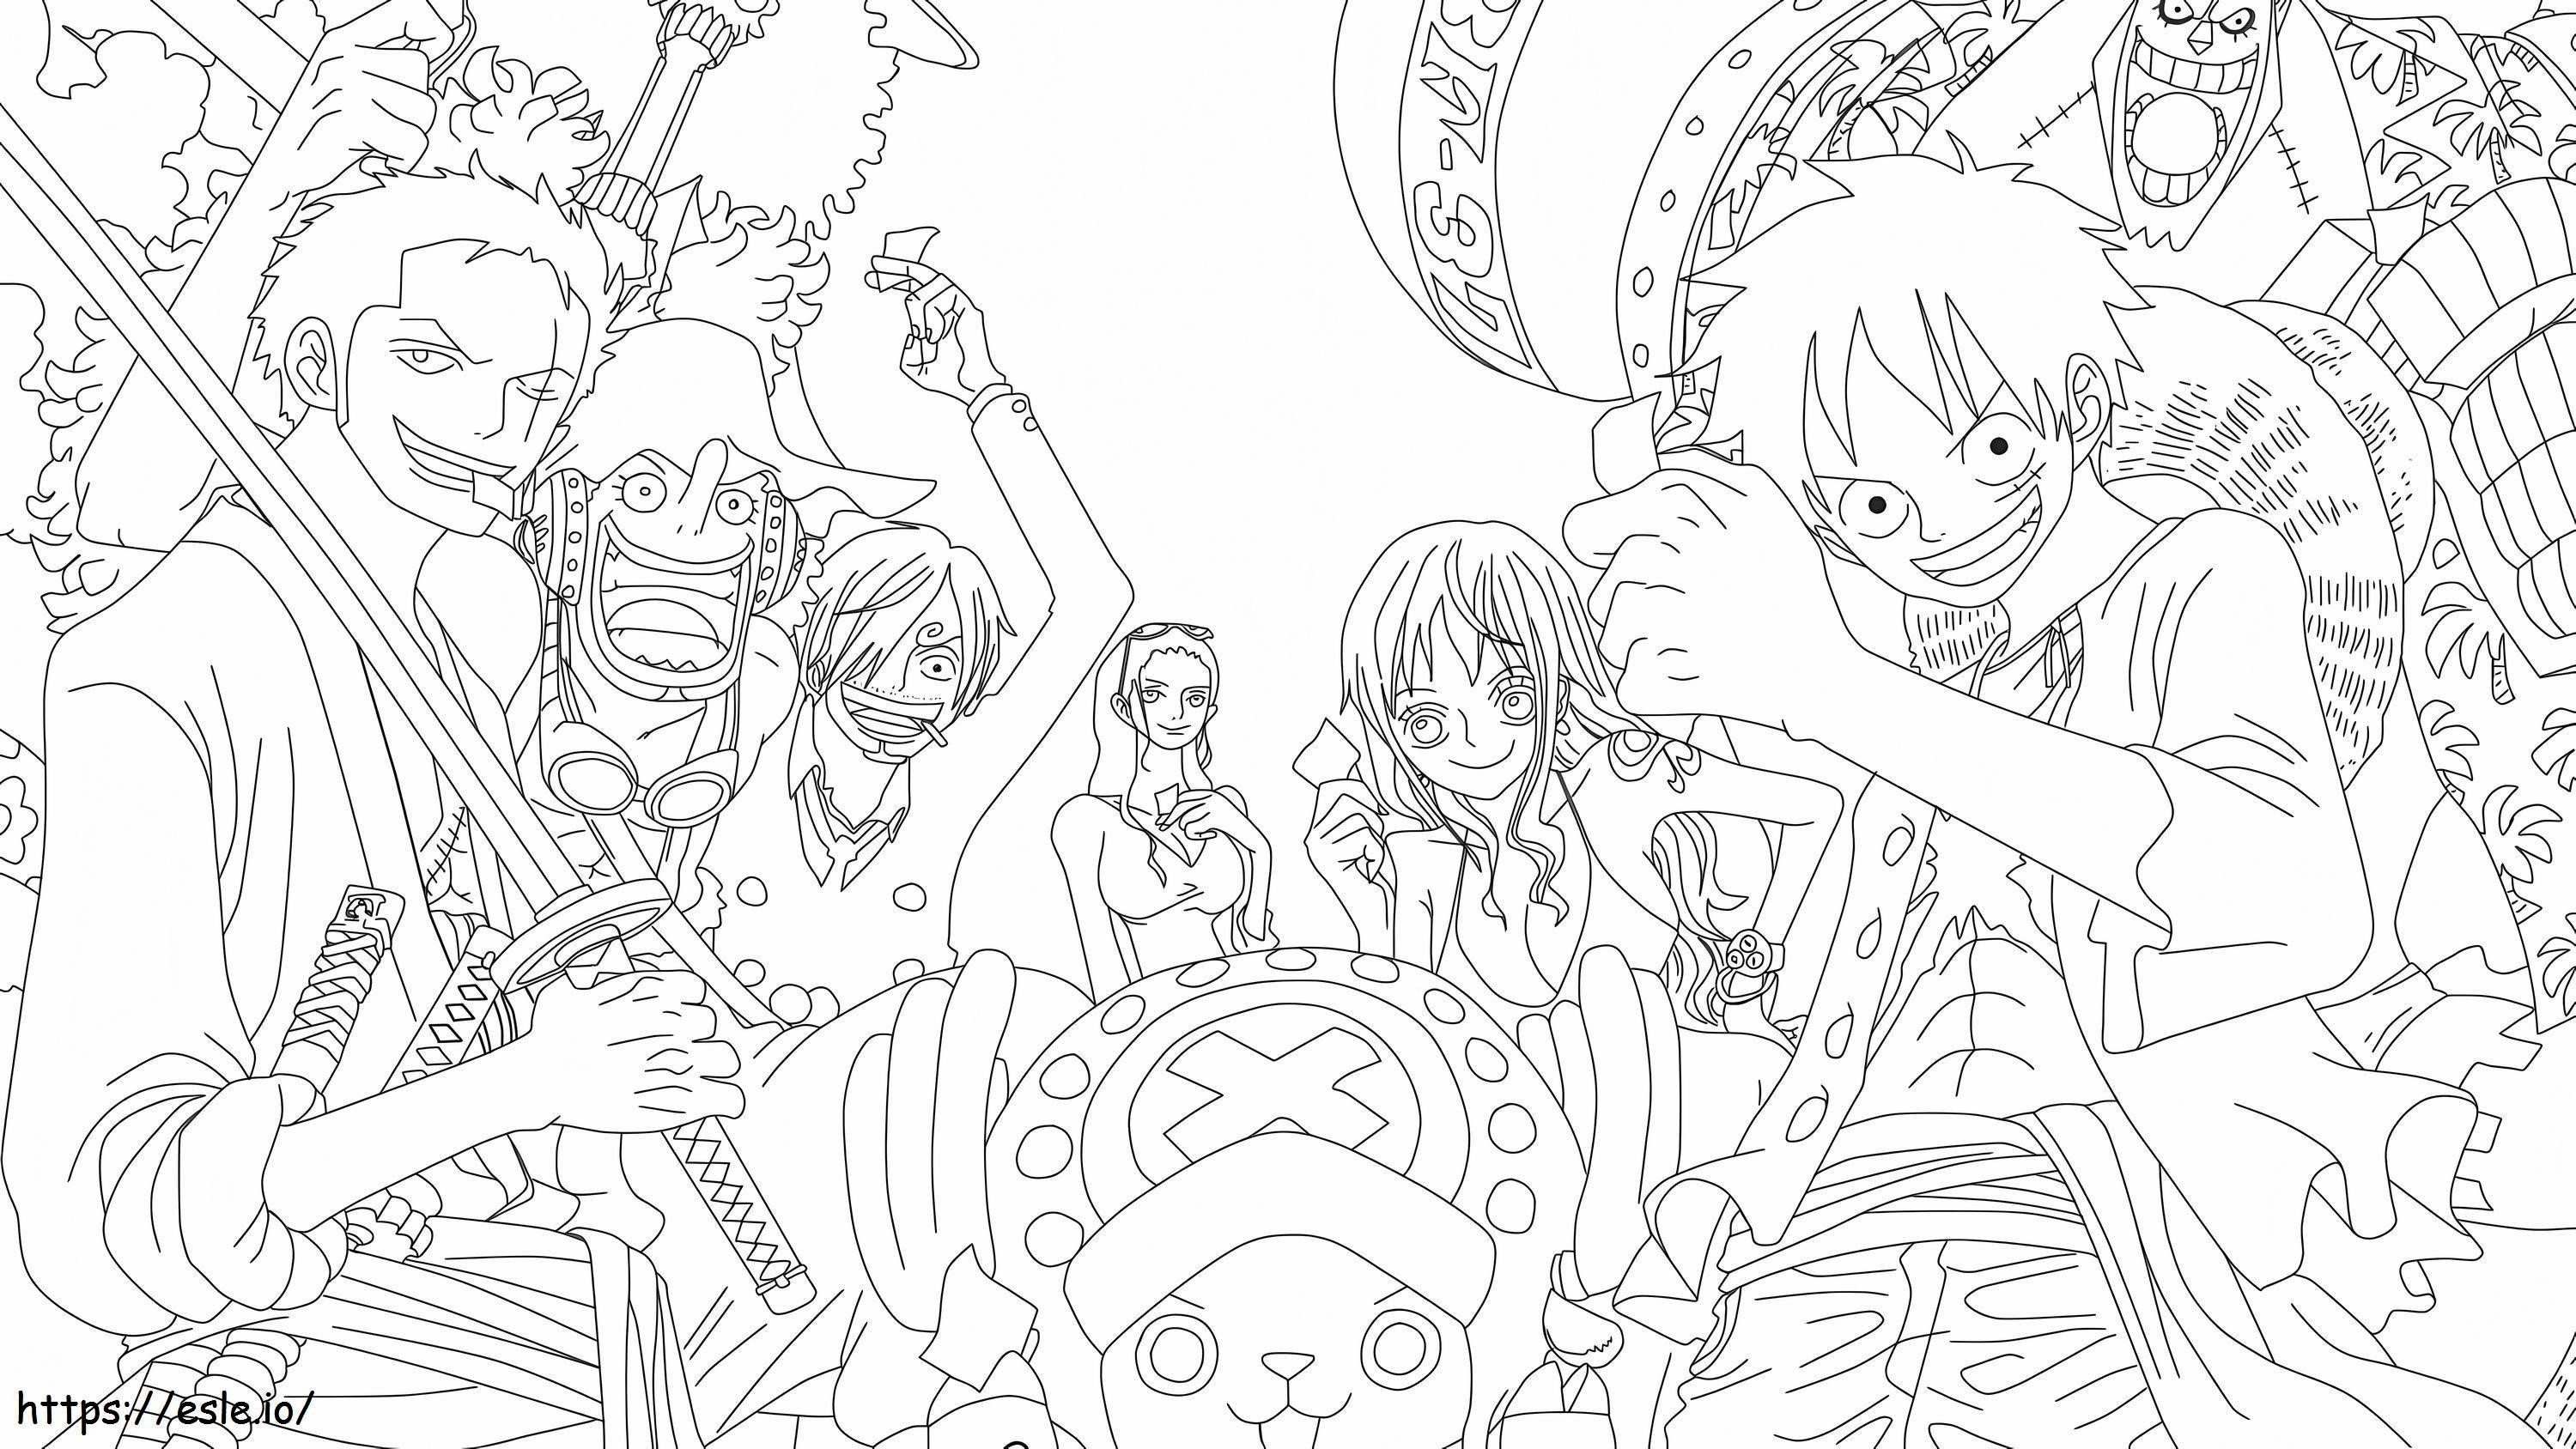 Zoro And Team coloring page